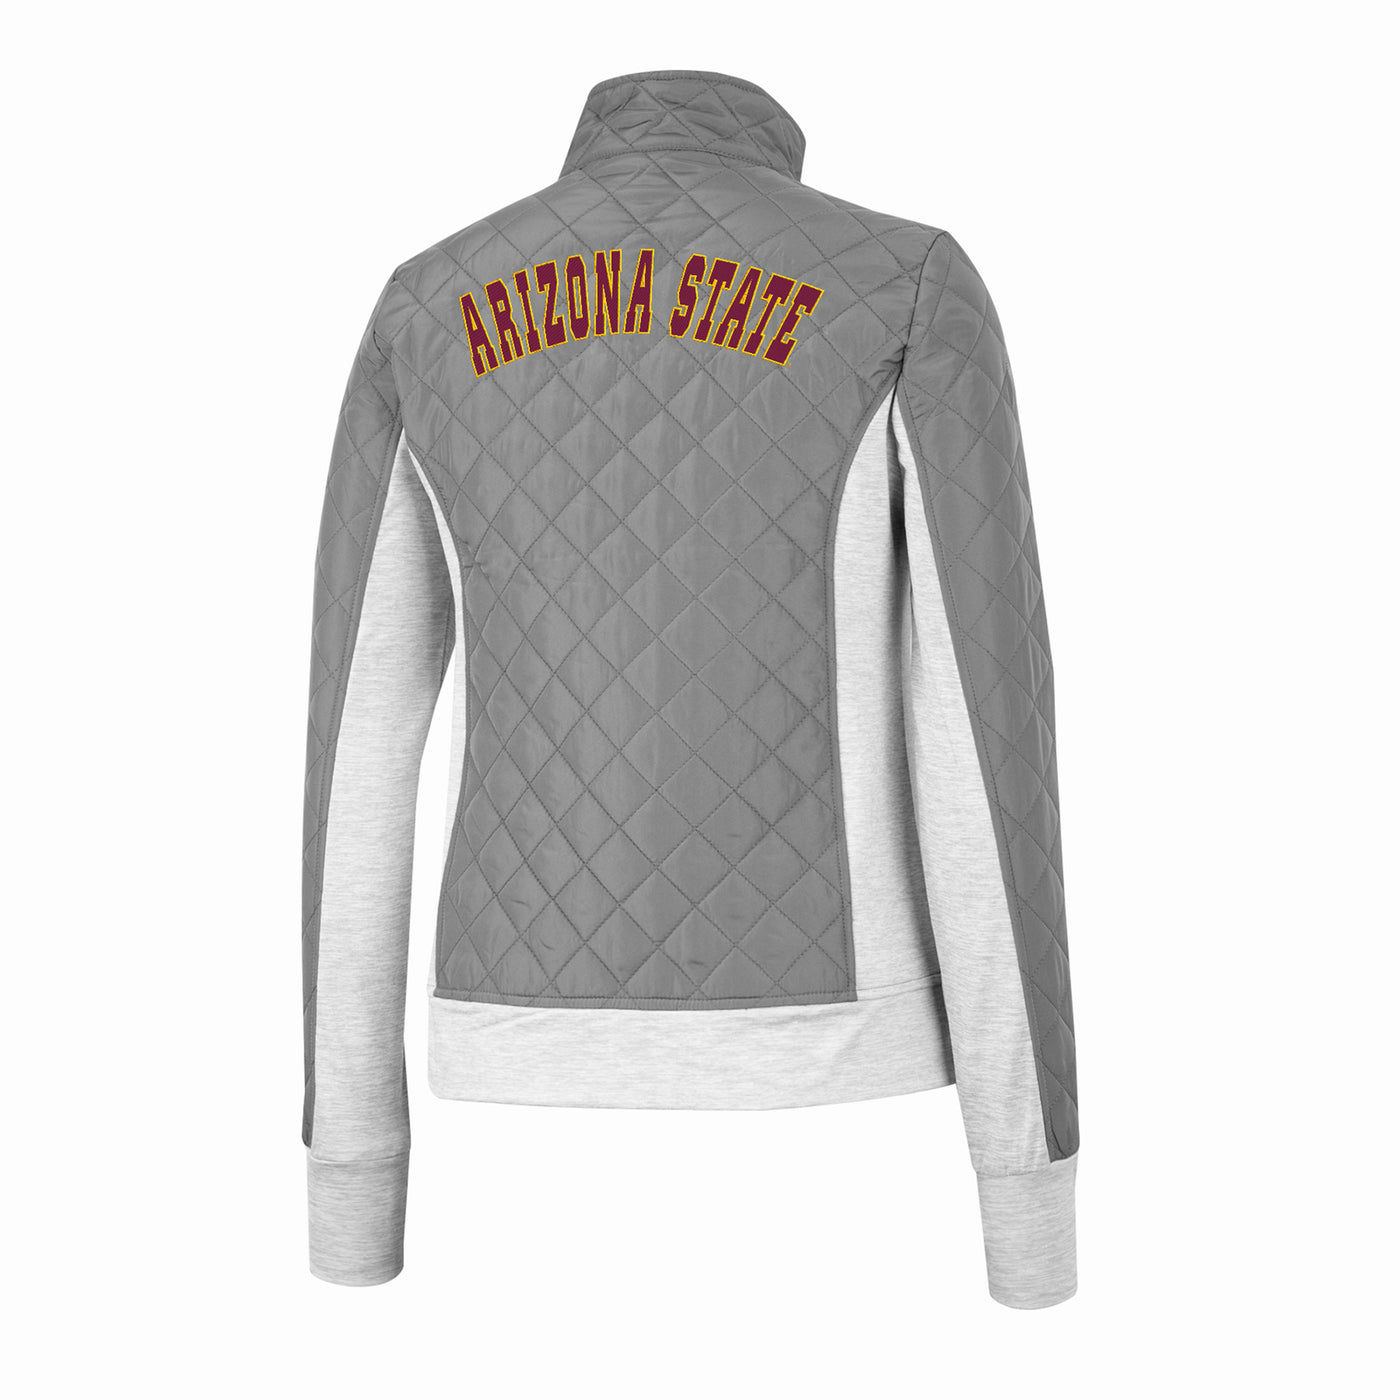 ASU women's gray jacket with 'Arizona State' embroidered letters arched on the upper back